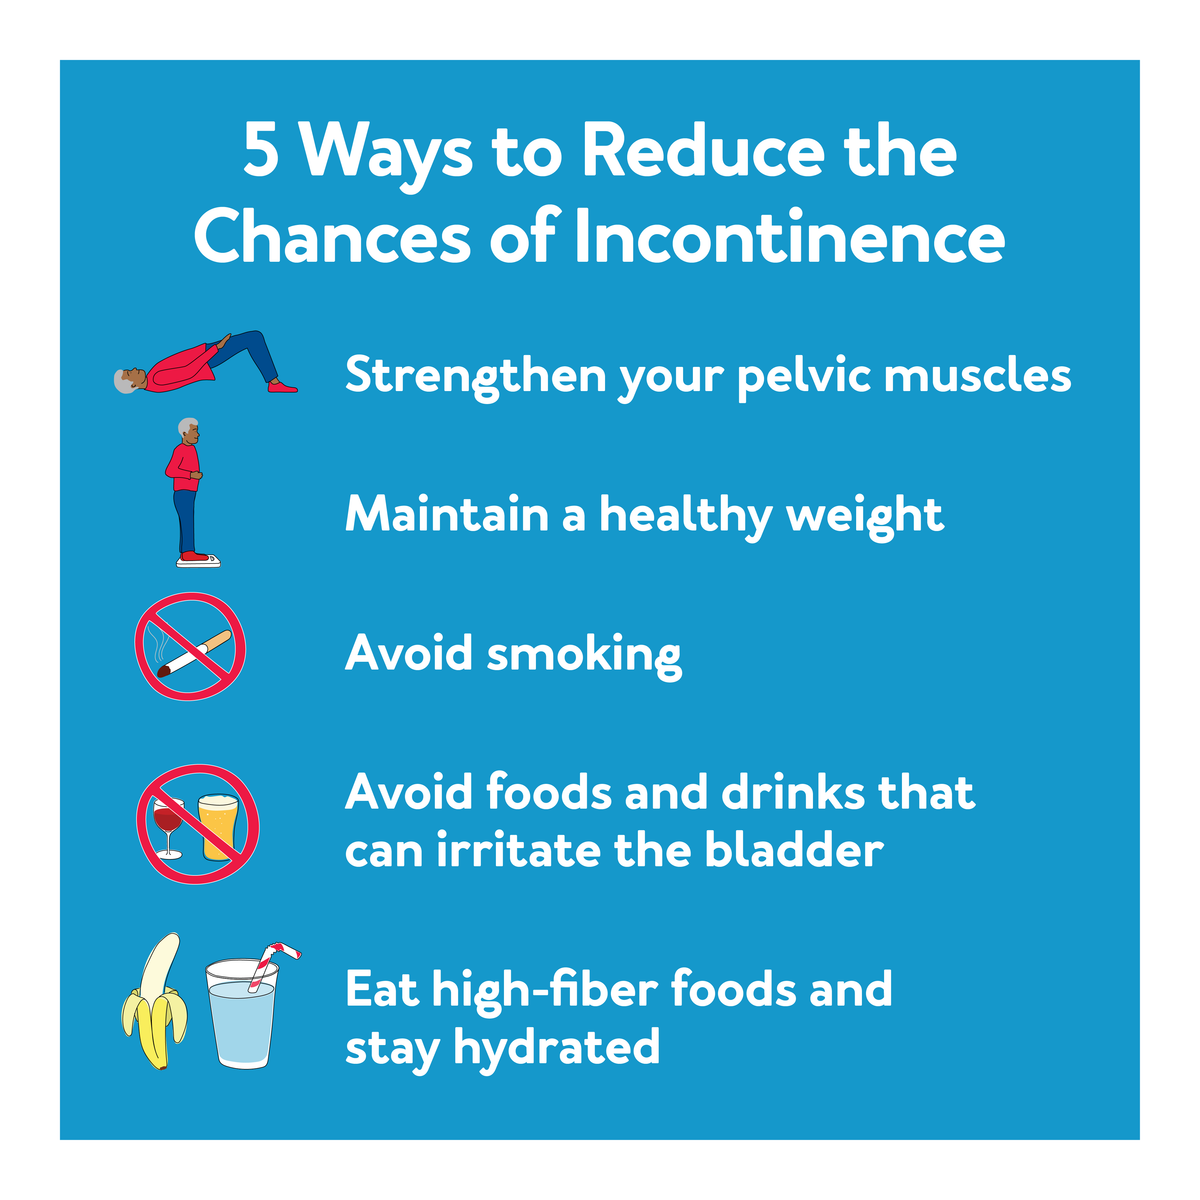 5 Ways to Reduce the Chances of Incontinence : Further details are provided below